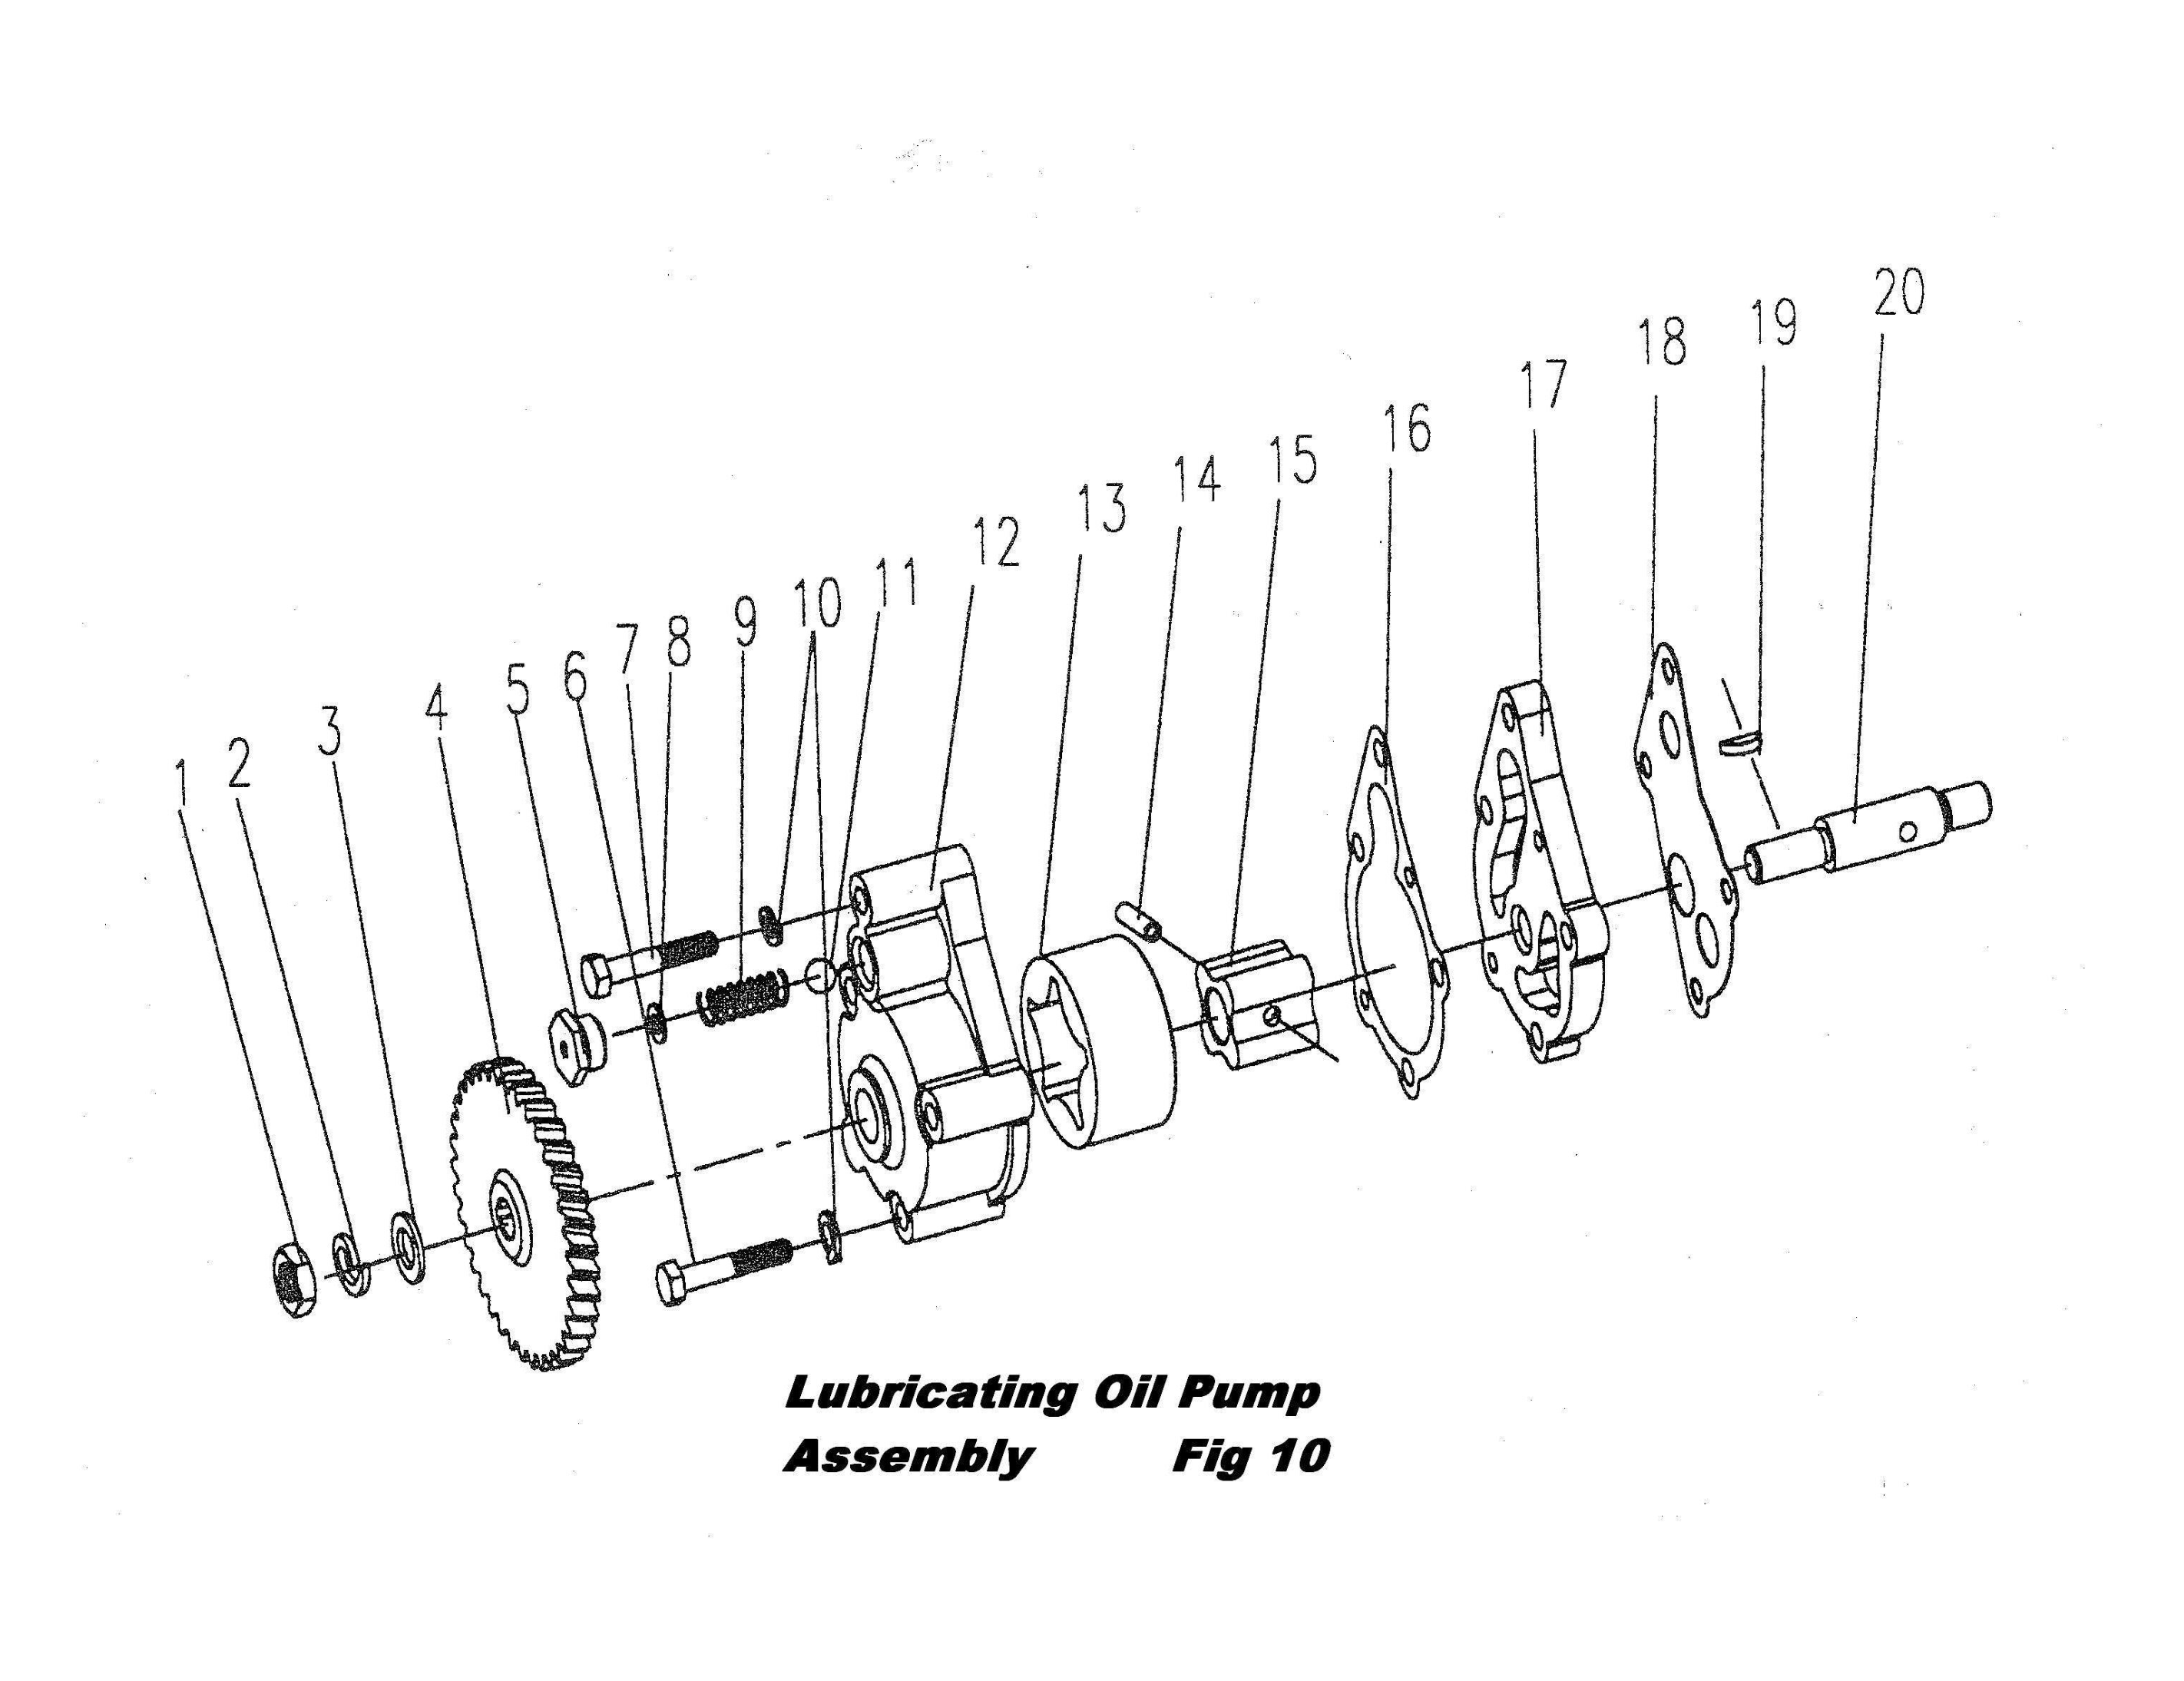 Lubrication Oil Pump Assembly